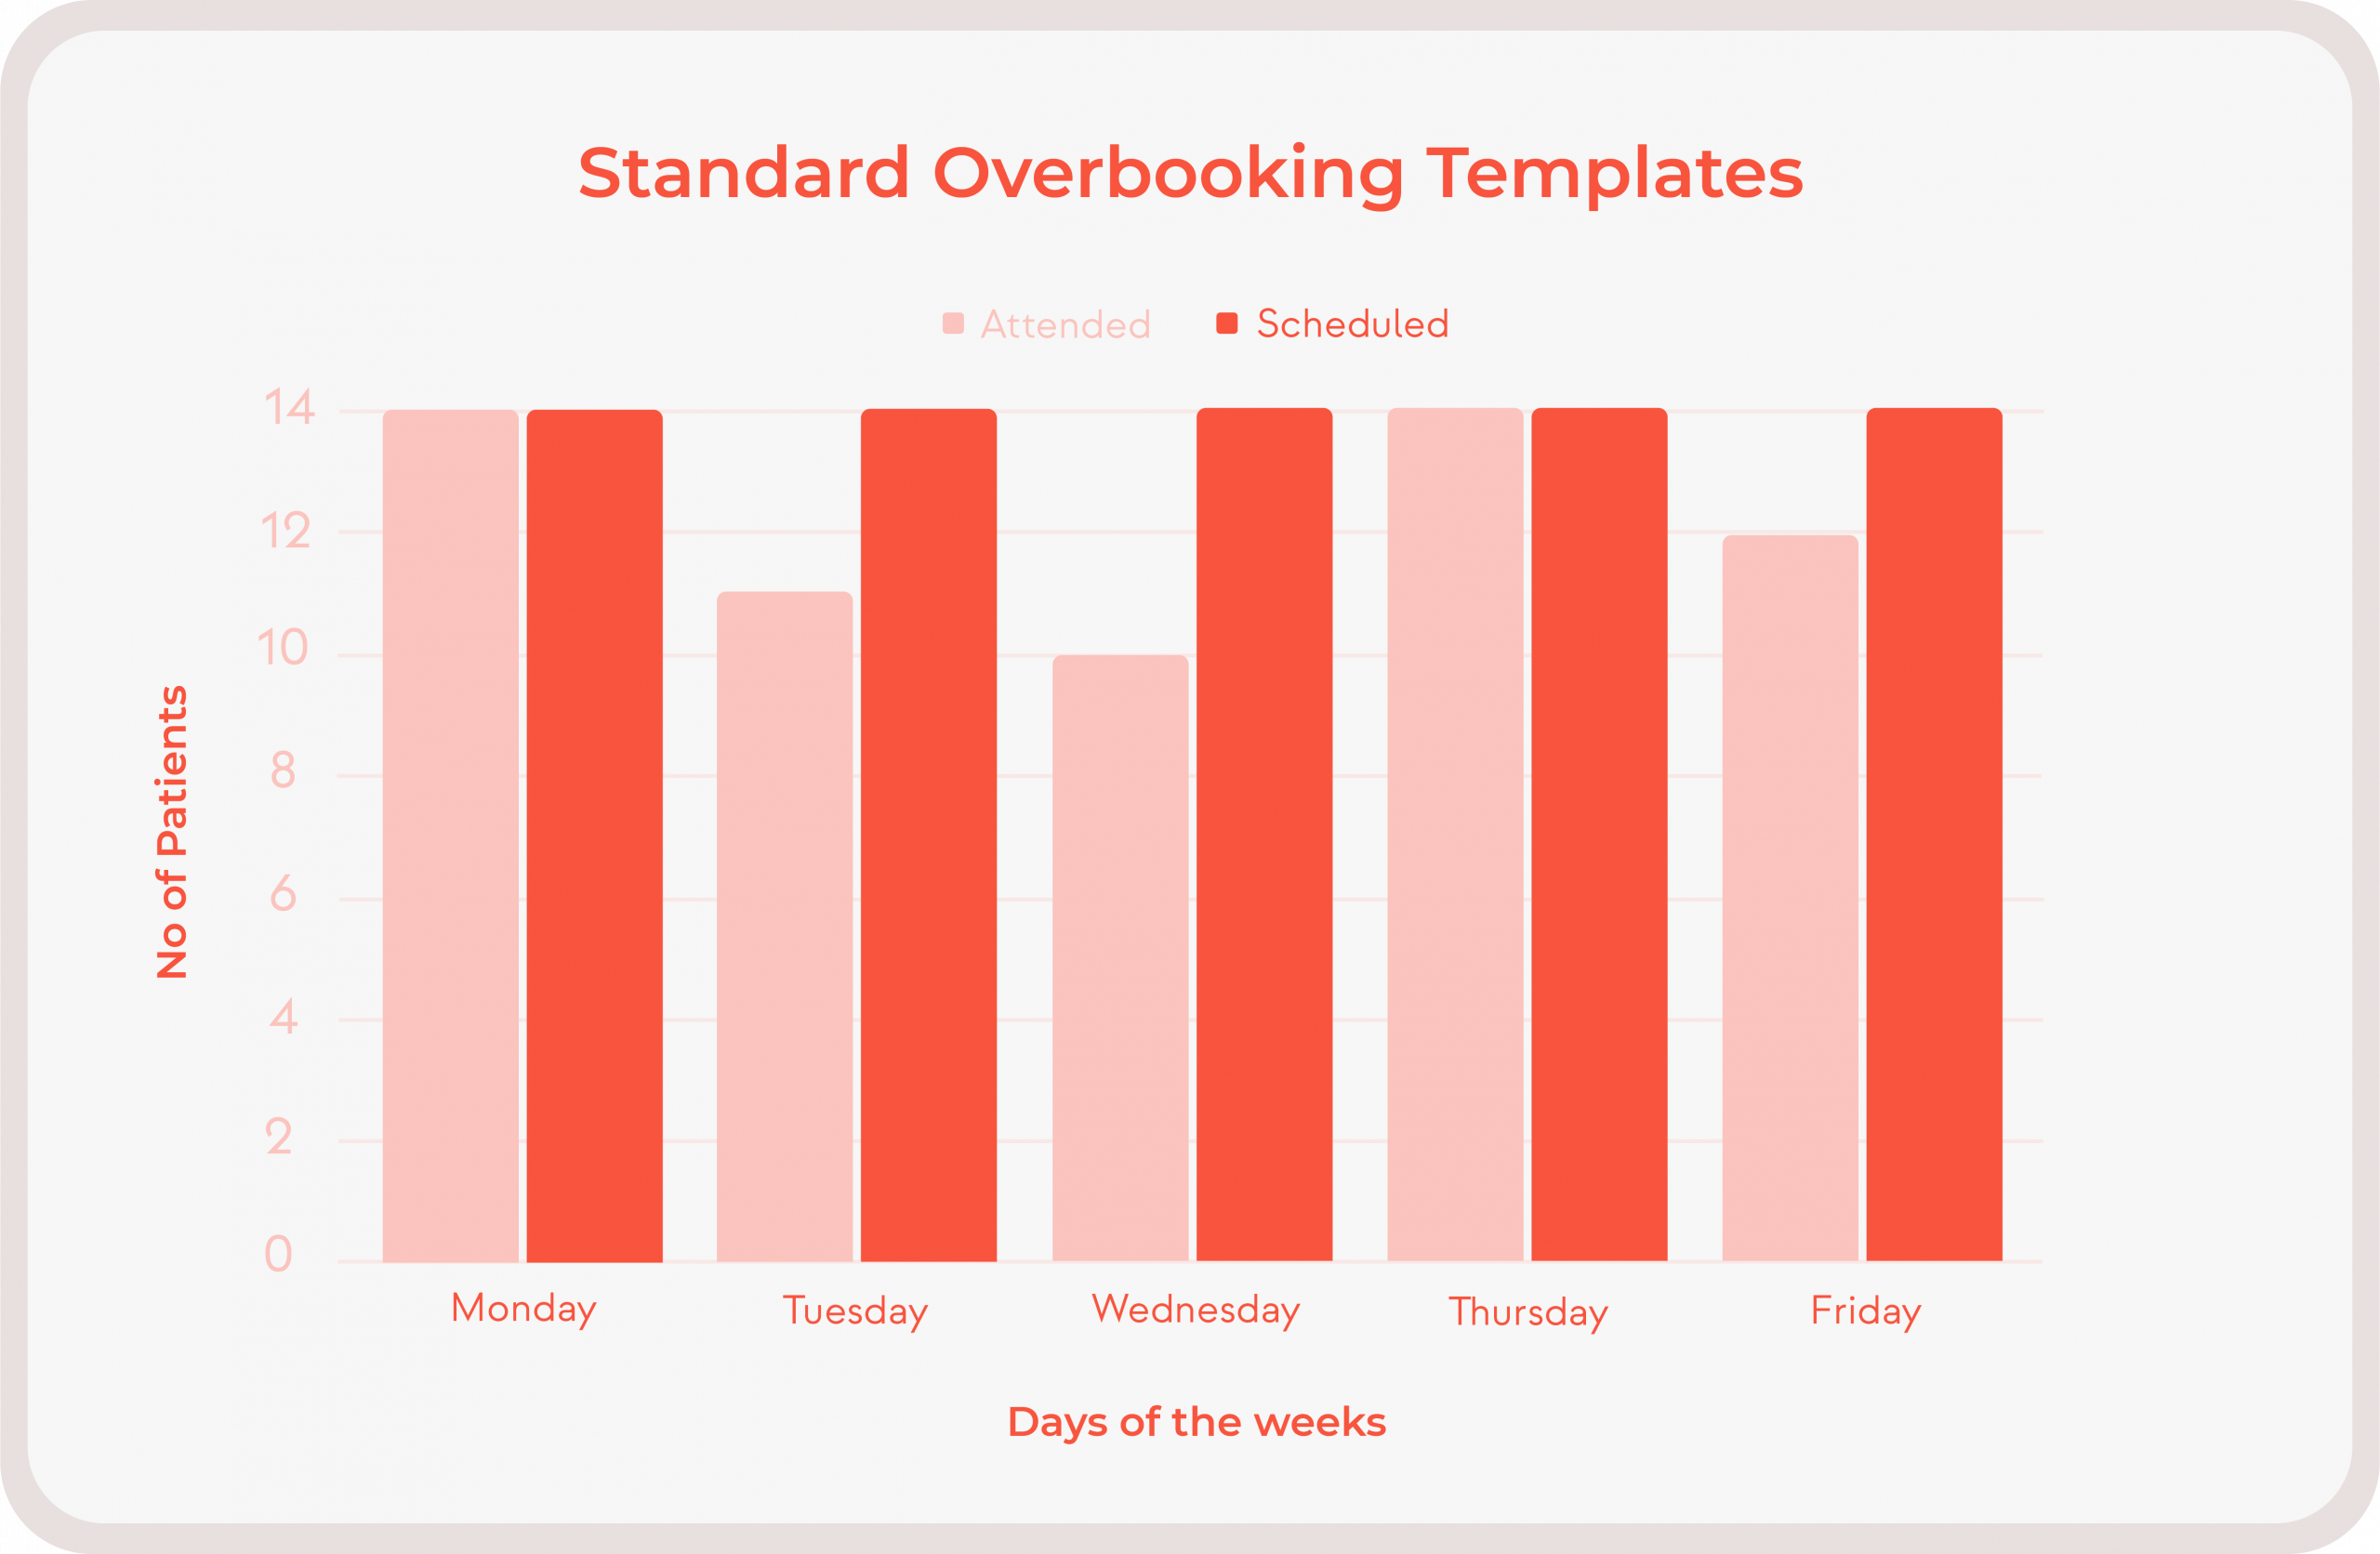 Standard Overbooking Templates